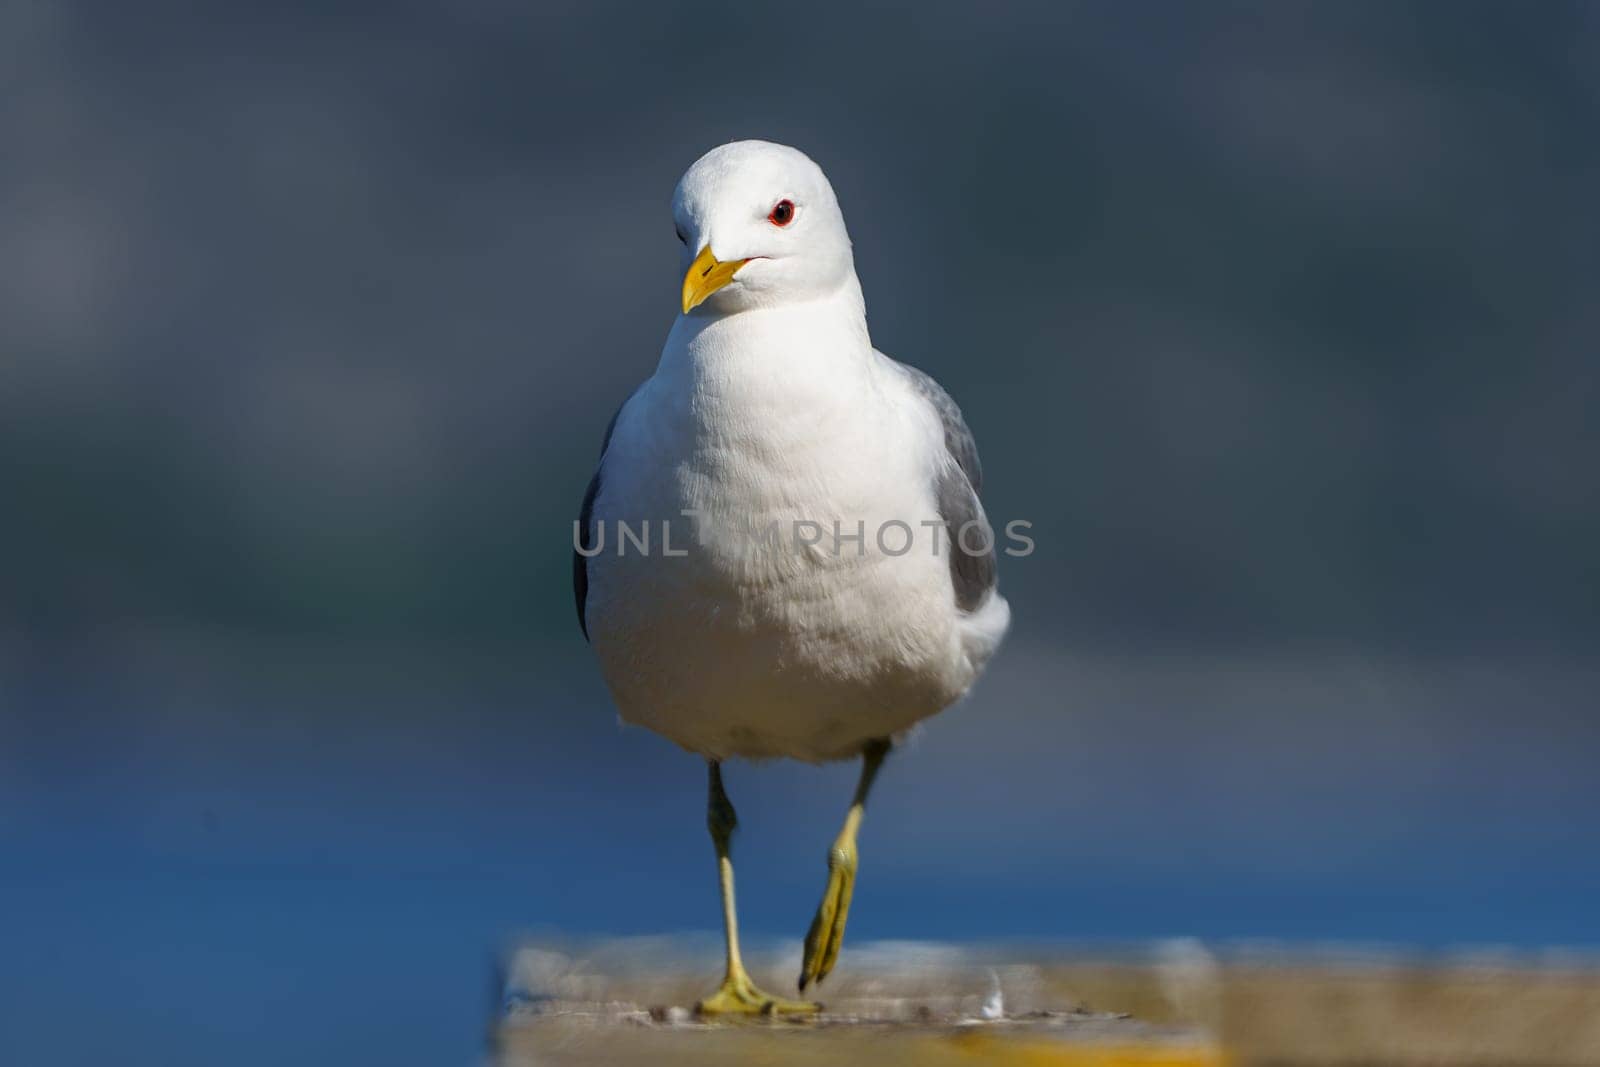 Close-up photograph of a majestic Northern Norwegian seagull perched on a weather-beaten dock, showcasing stunning feather details and intricate patterns in its plumage.